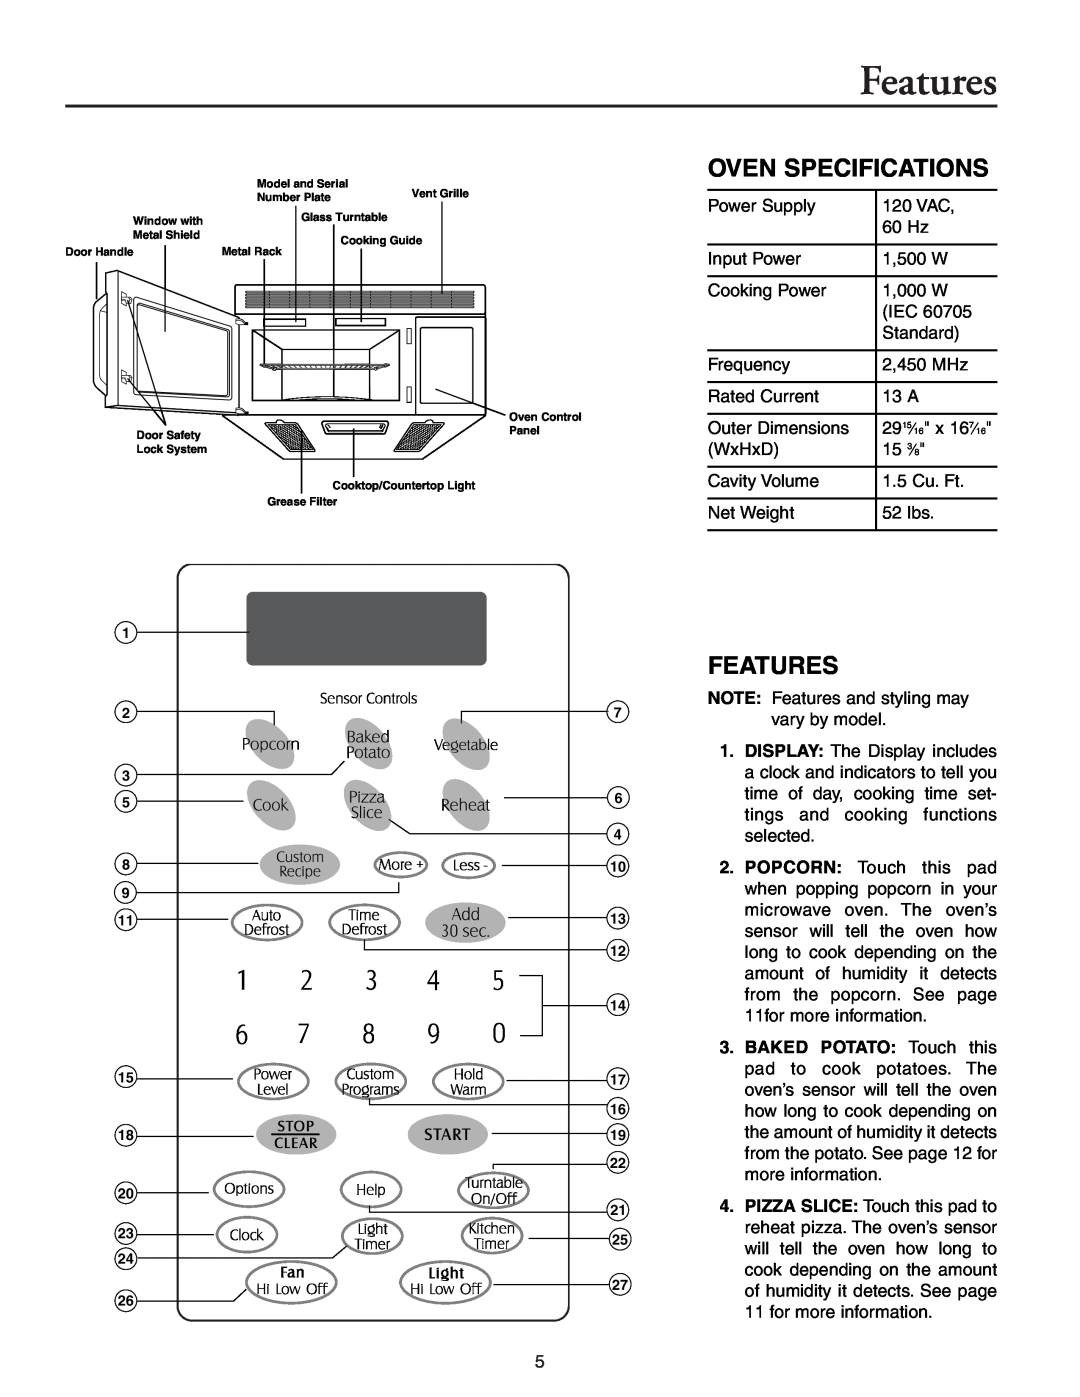 Maytag MMV51566AA/MMV5156AC owner manual Features, Oven Specifications 